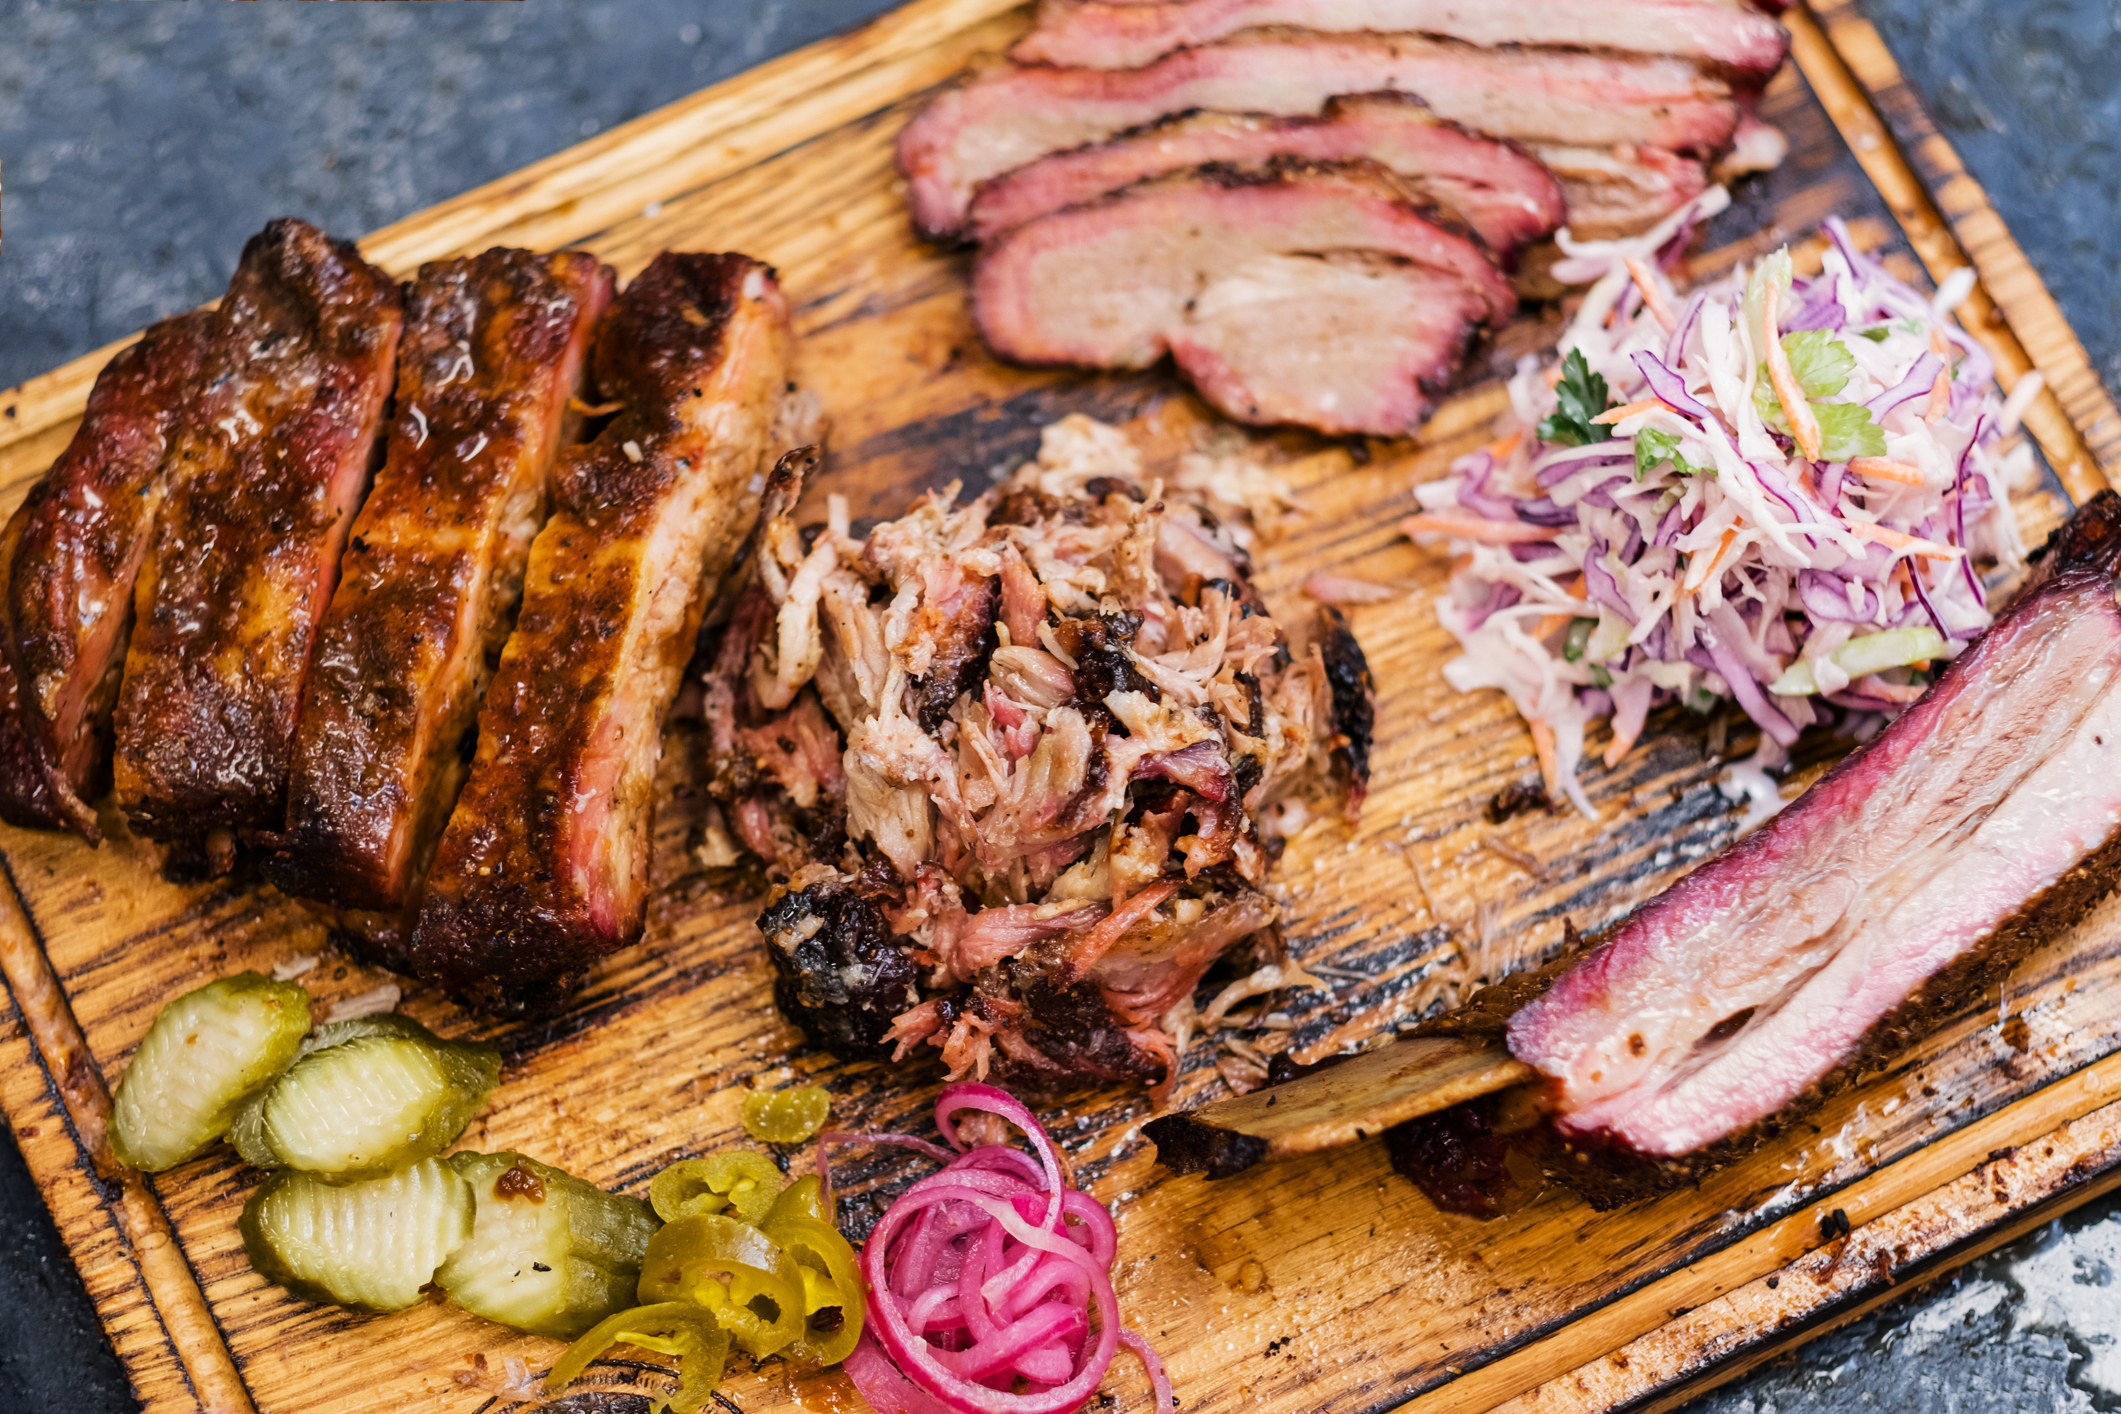 Smoked meat on a wooden board with ribs, pulled pork, brisket, coleslaw, pickles, and onions